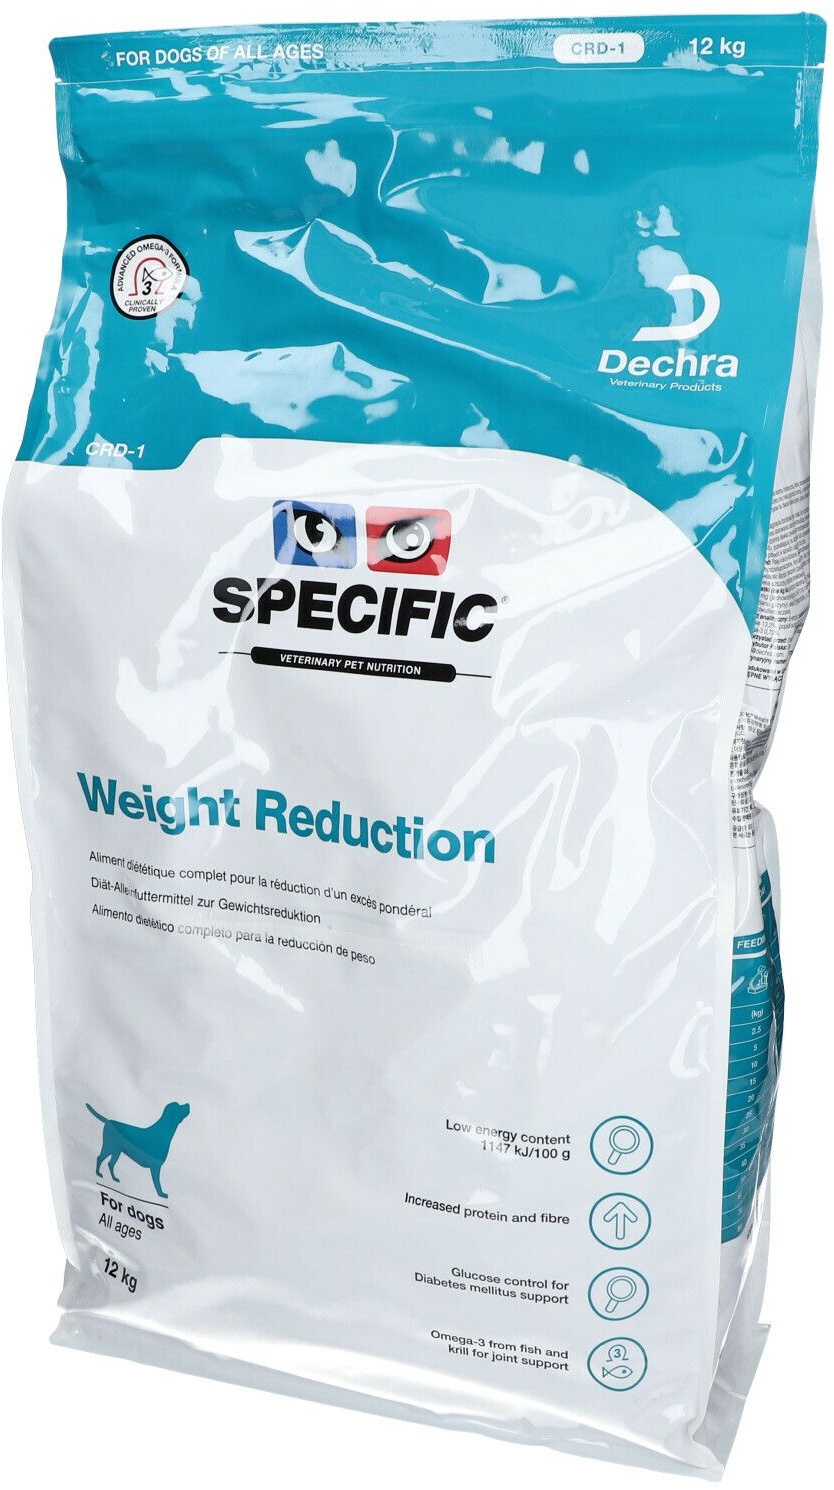 SPECIFIC® CRD-1 Weight Reduction 12 kg pellet(s)